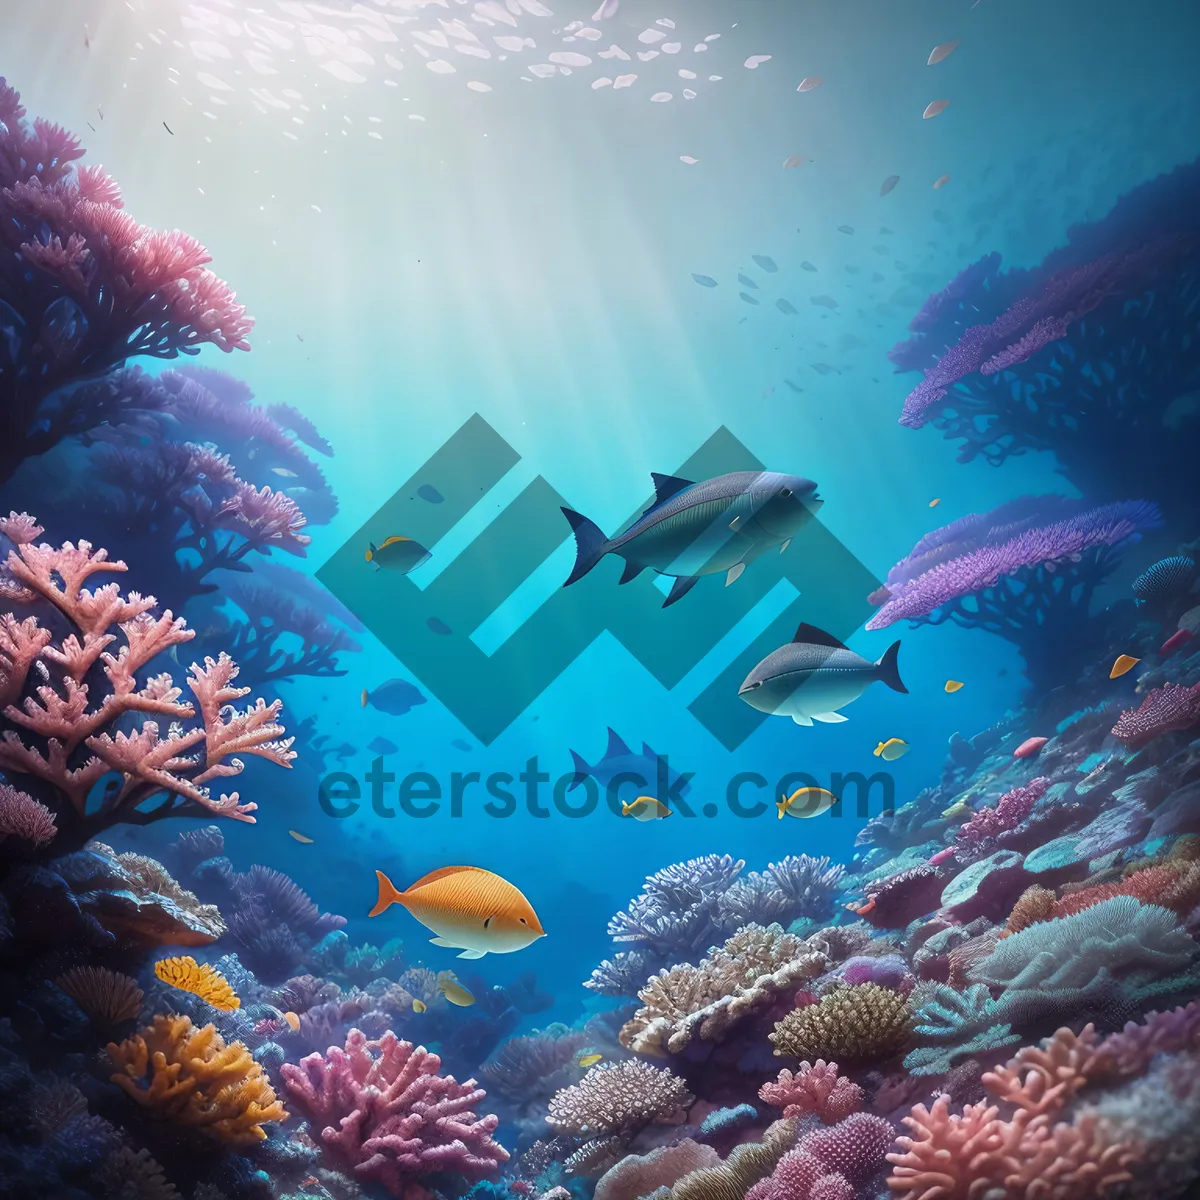 Picture of Tropical Coral Reef Underwater Life with Diverse Marine Fish